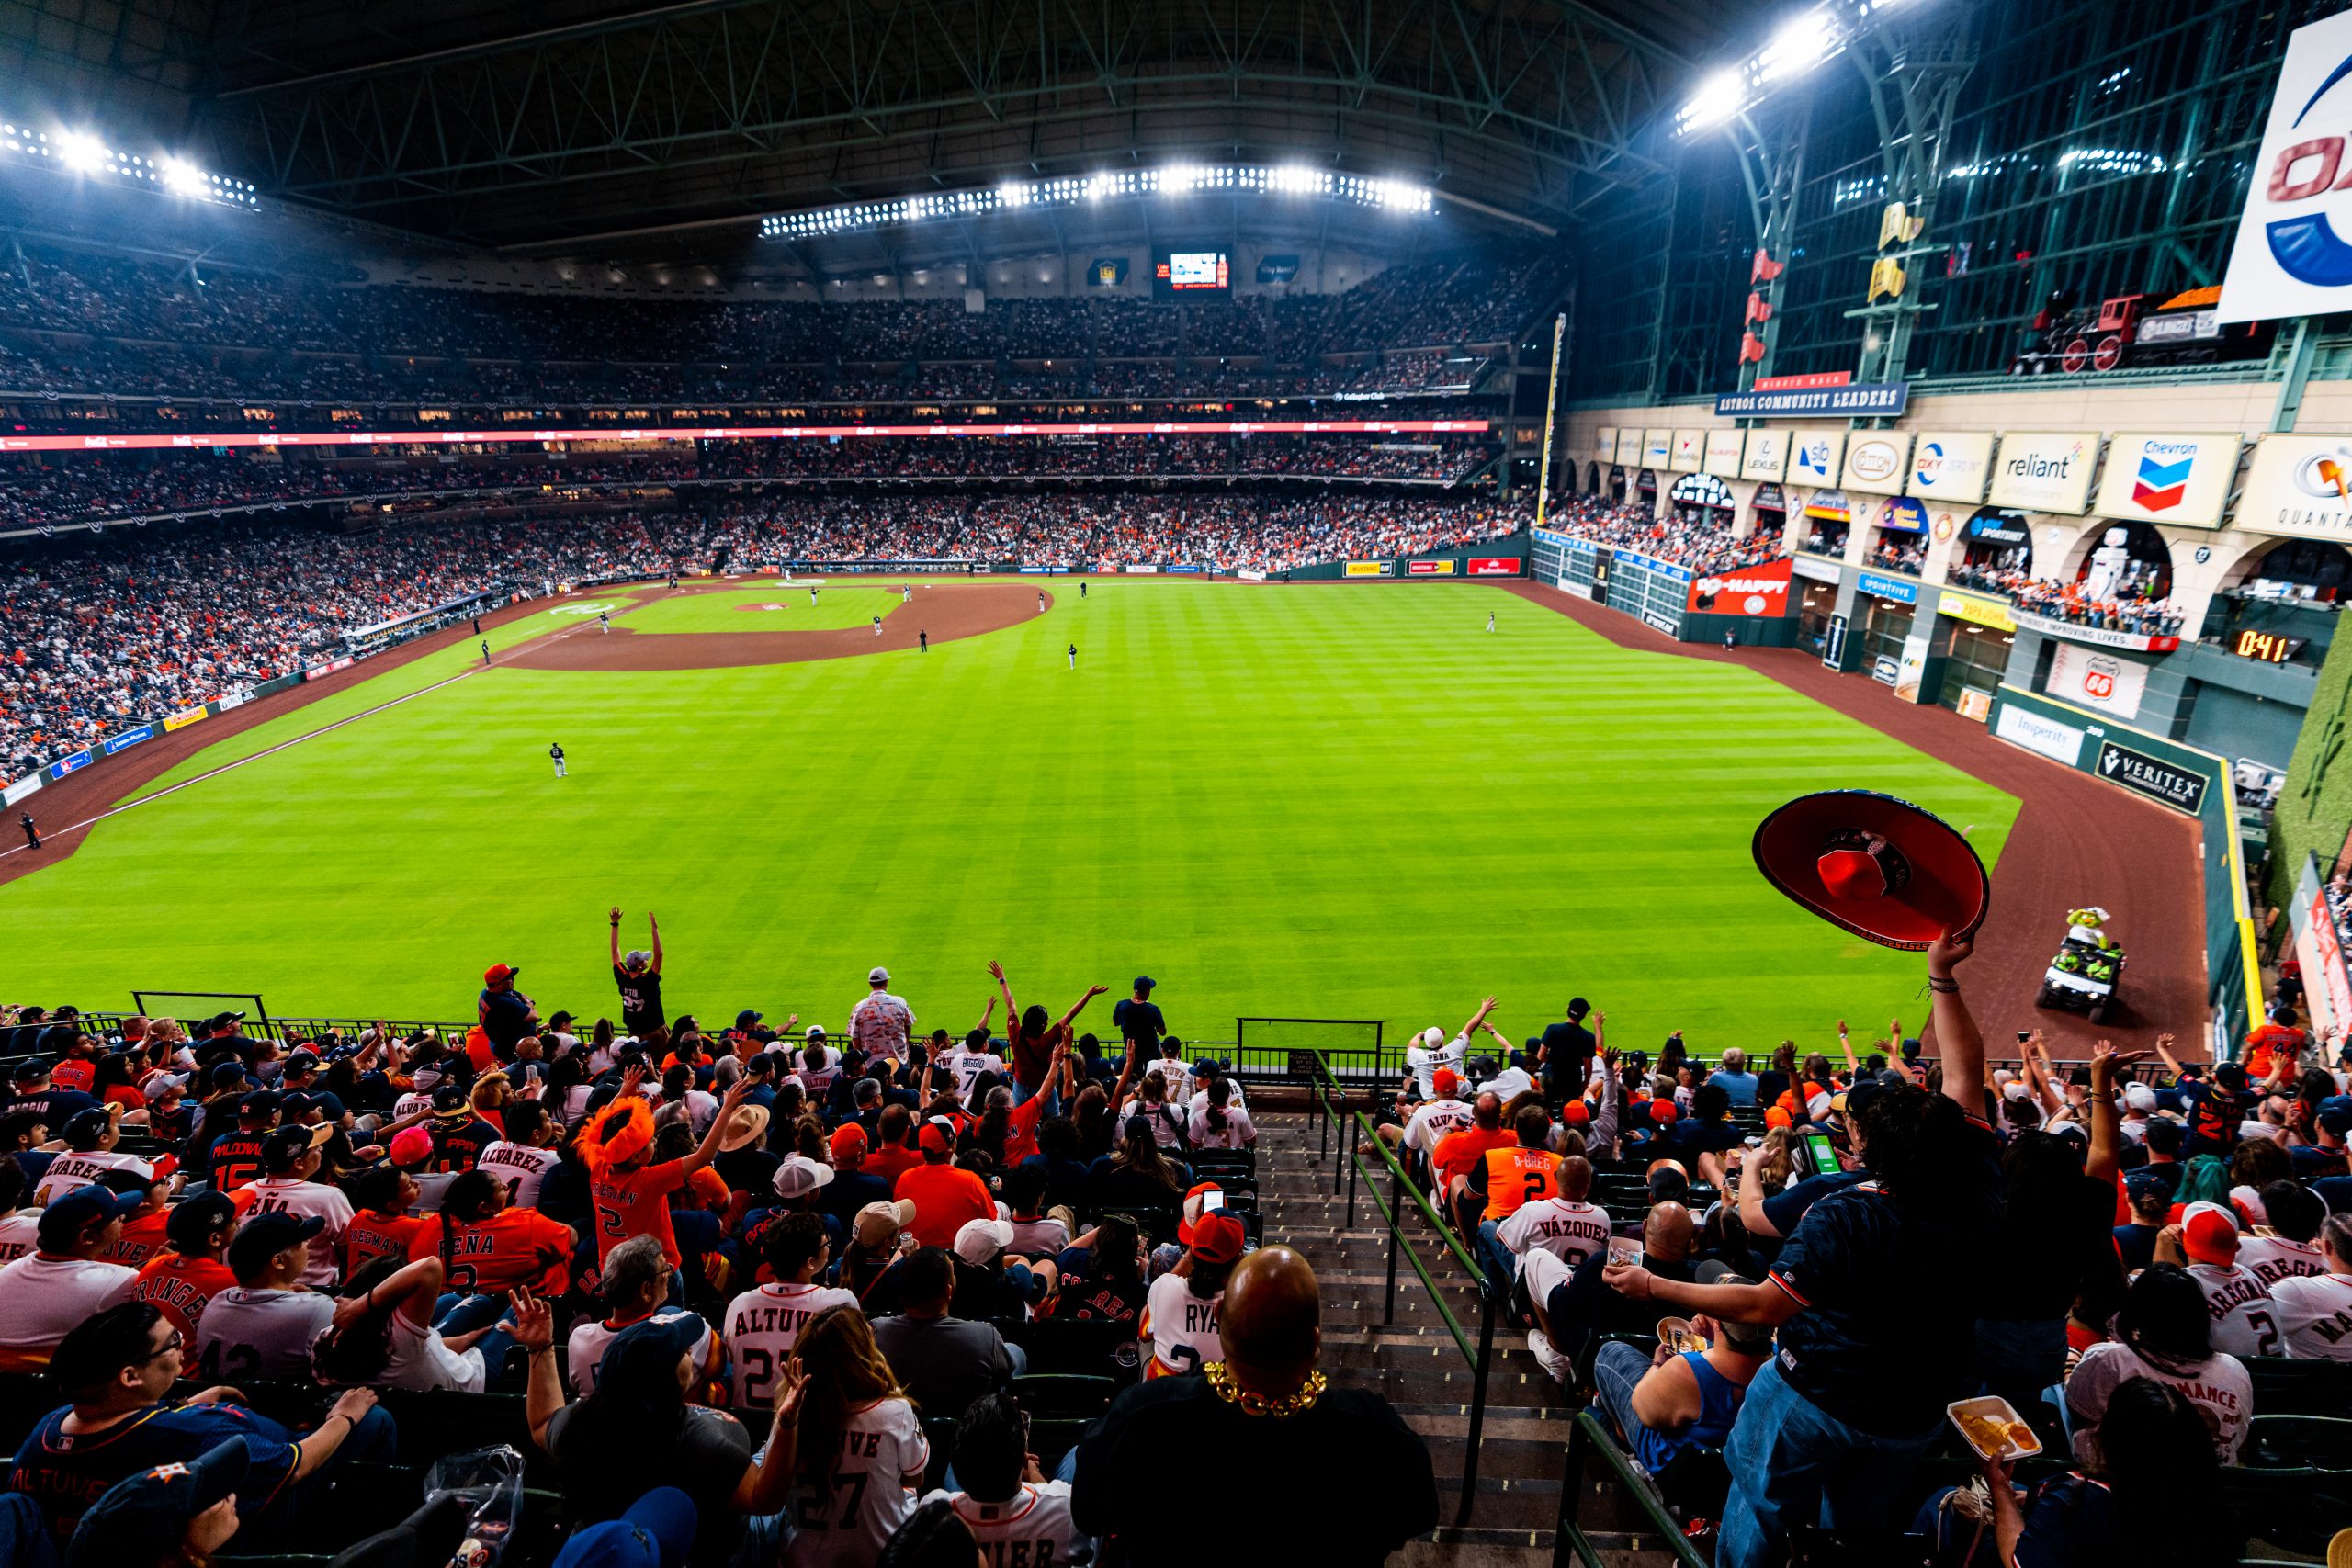 Crowd has family friendly fun at an Astros game, showing a view from the seats of Minute Maid Park